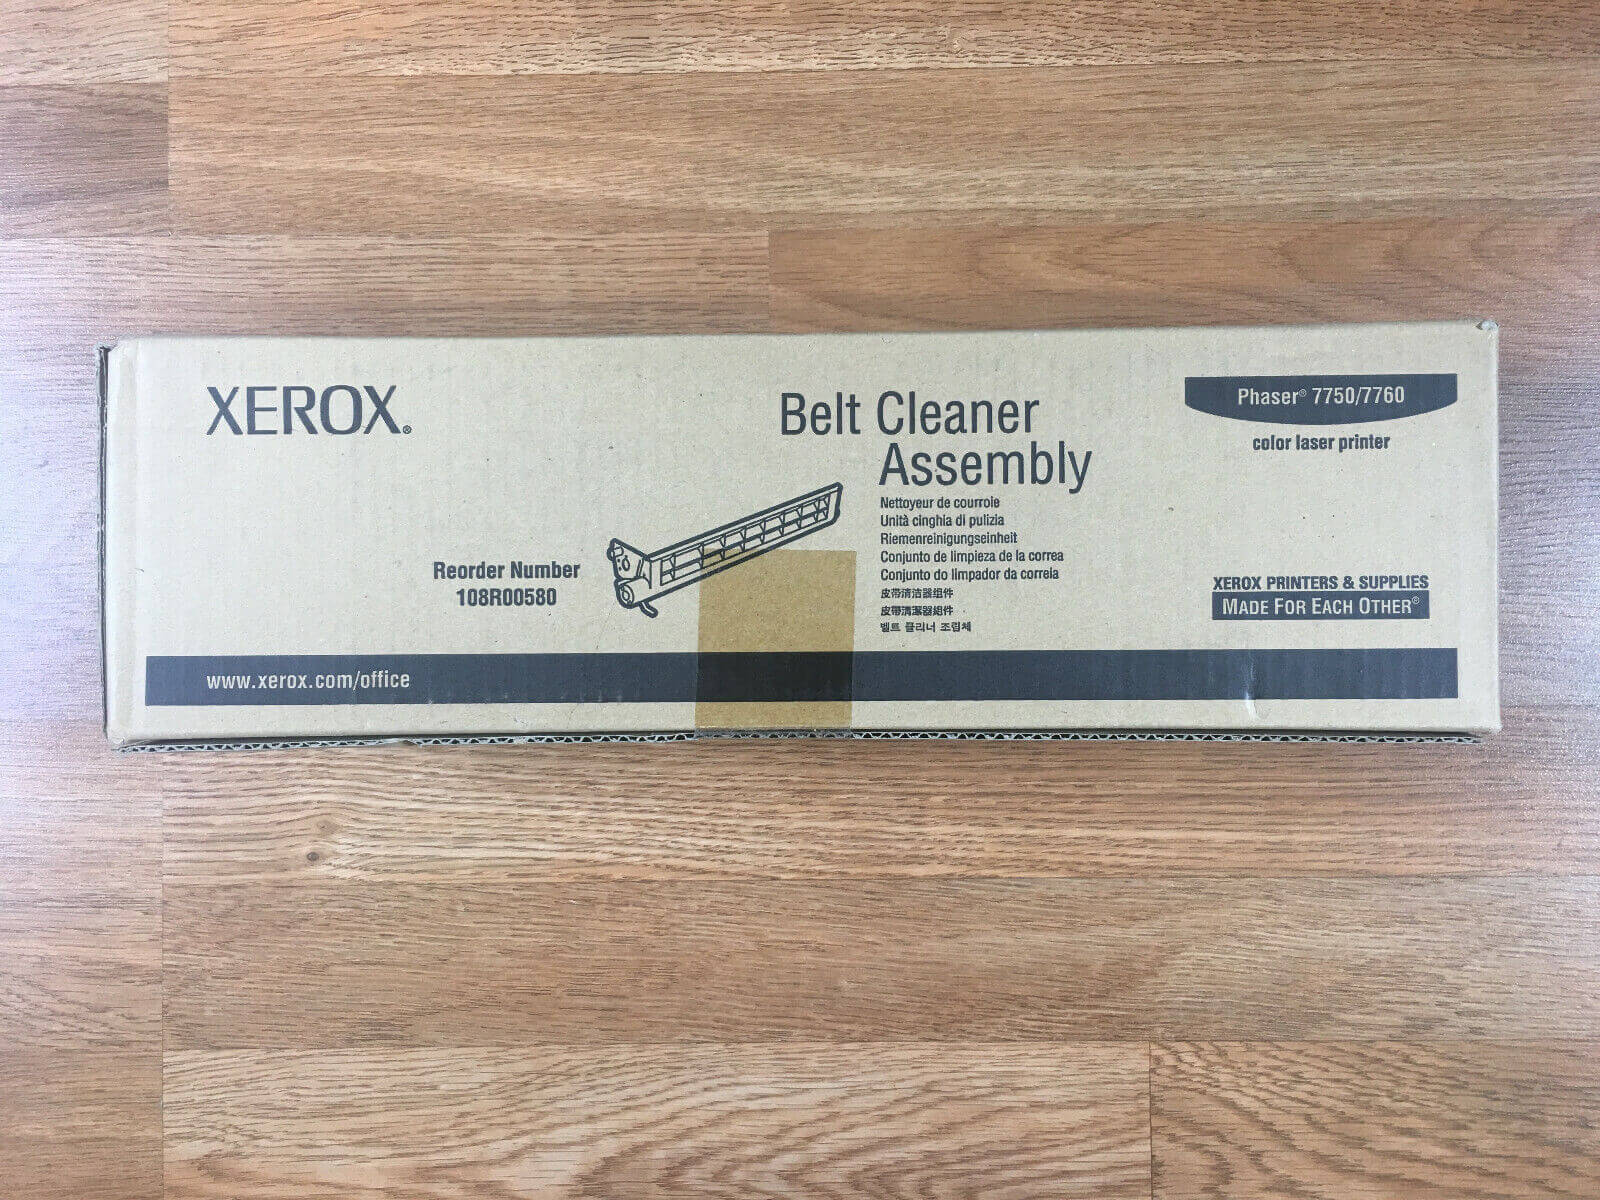 Genuine Xerox Phaser 7750 7760 Belt Cleaner Assembly 108R00580 Same Day Shipping - copier-clearance-center